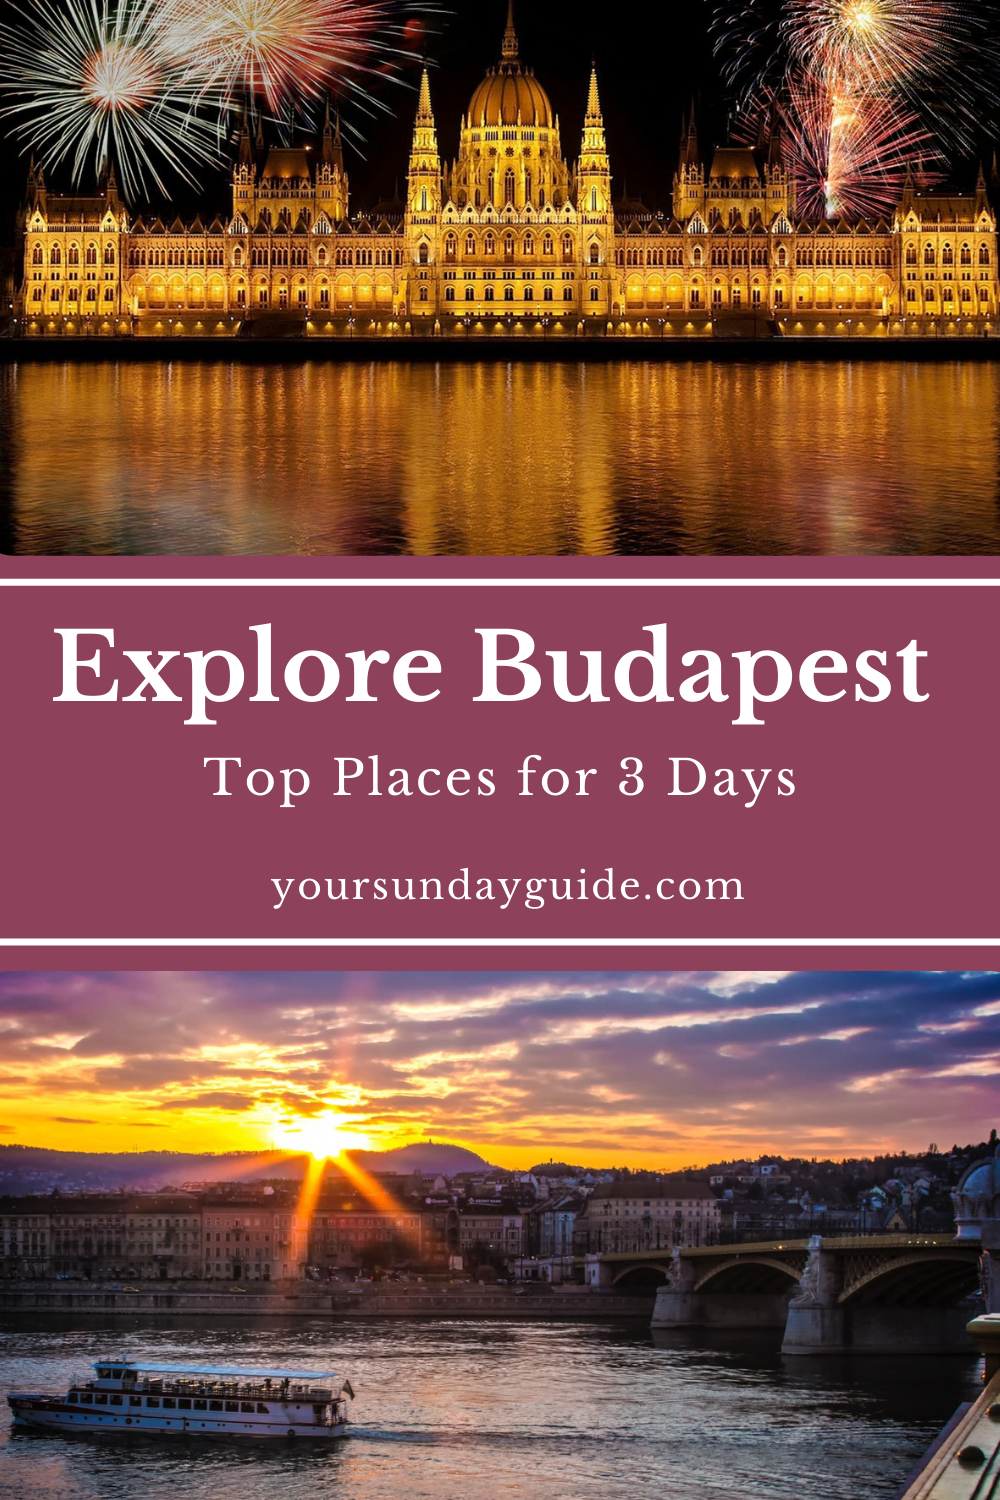 Explore Budapest in 3 days